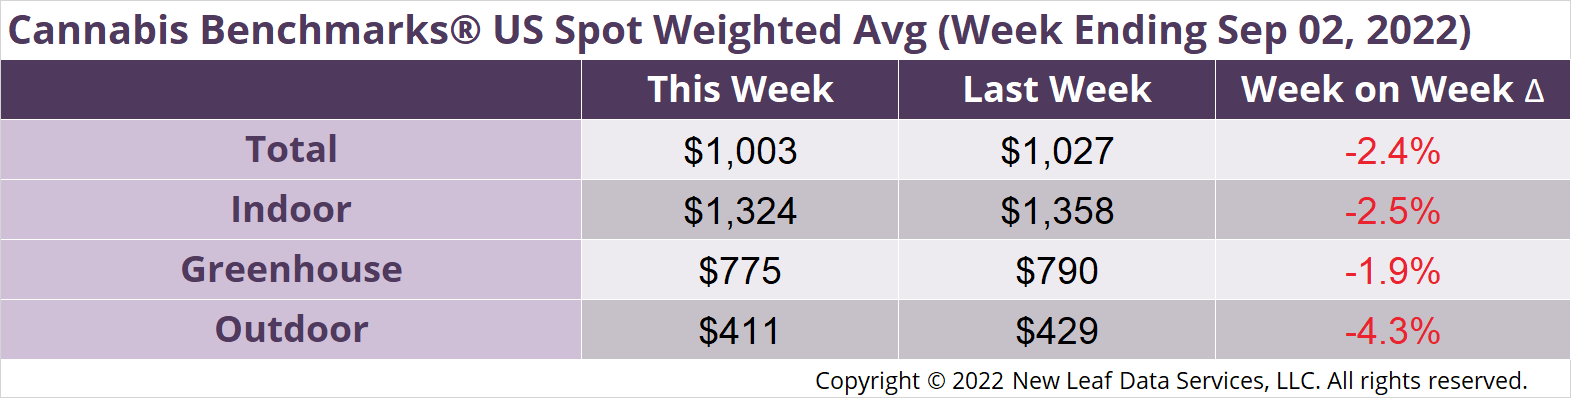 Cannabis Benchmarks U.S. Spot Weighted Average Prices September 2, 2022